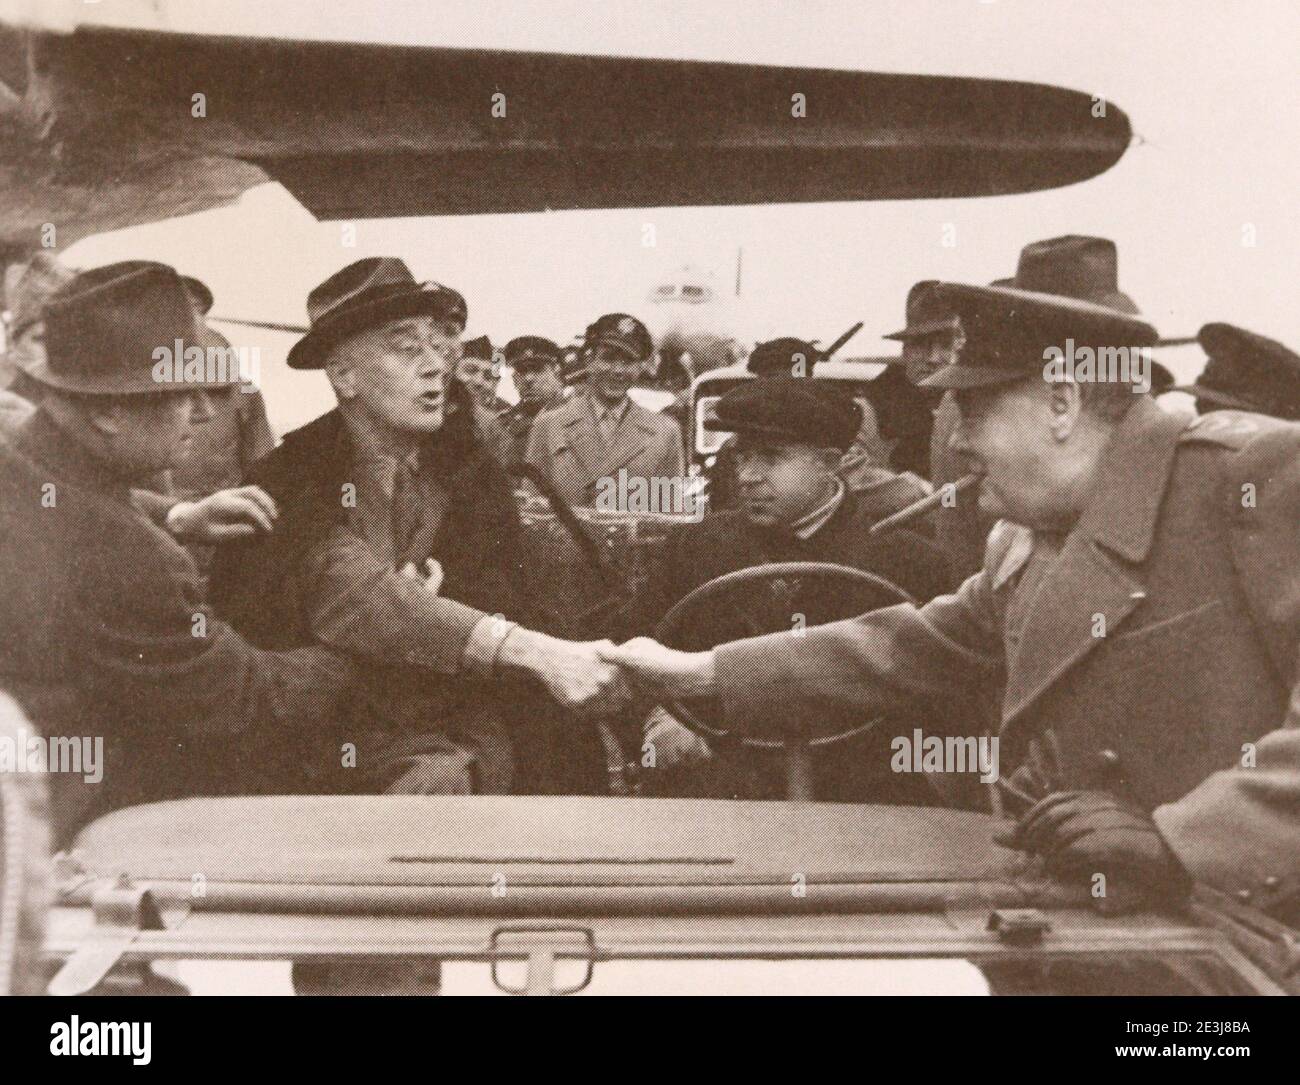 Meeting of Franklin Roosevelt and Winston Churchill at the Saki military airfield in Crimea on February 3, 1945. Stock Photo